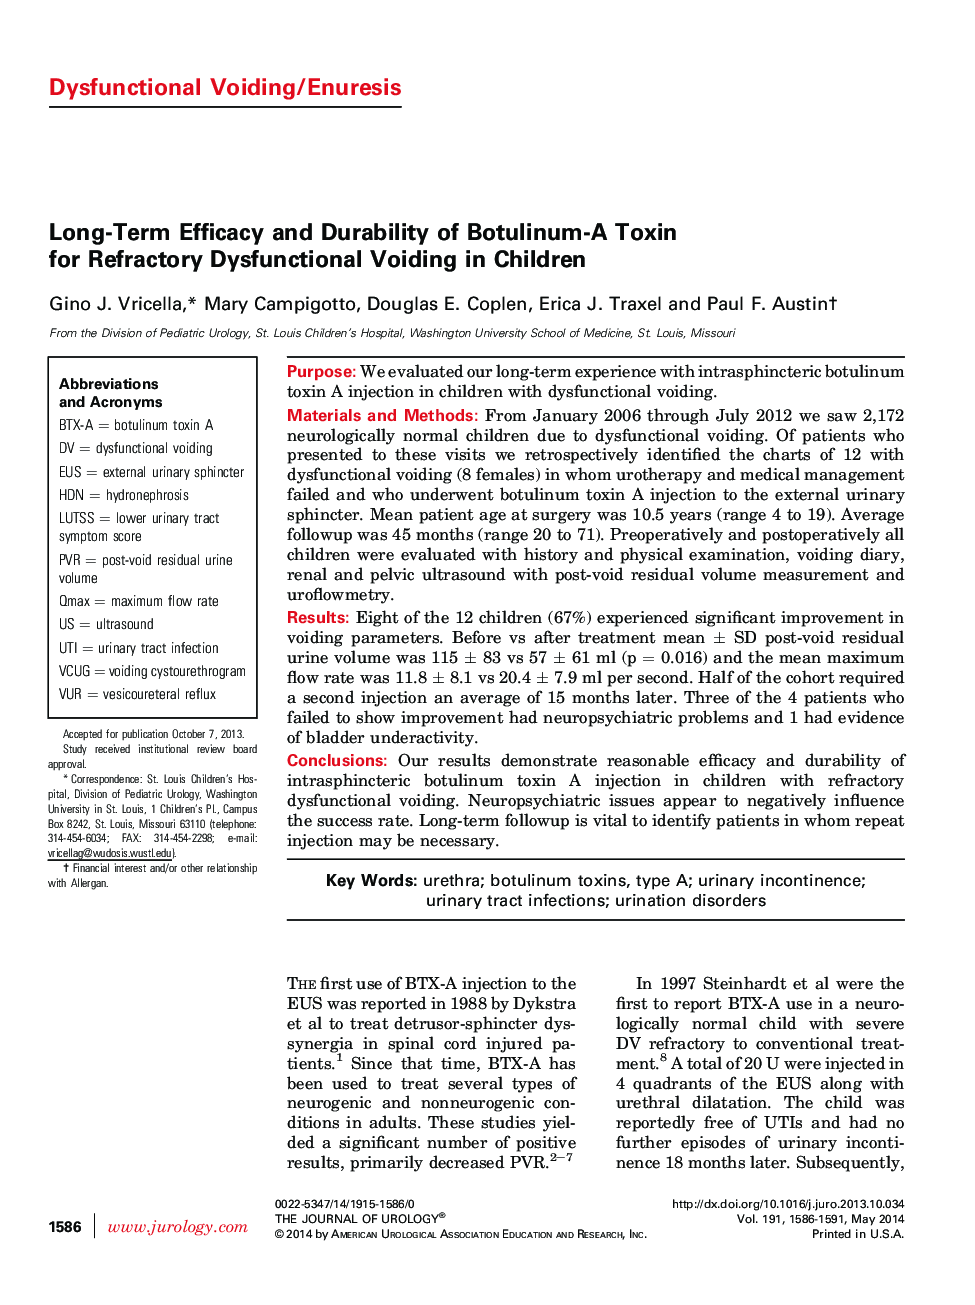 Long-Term Efficacy and Durability of Botulinum-A Toxin for Refractory Dysfunctional Voiding in Children